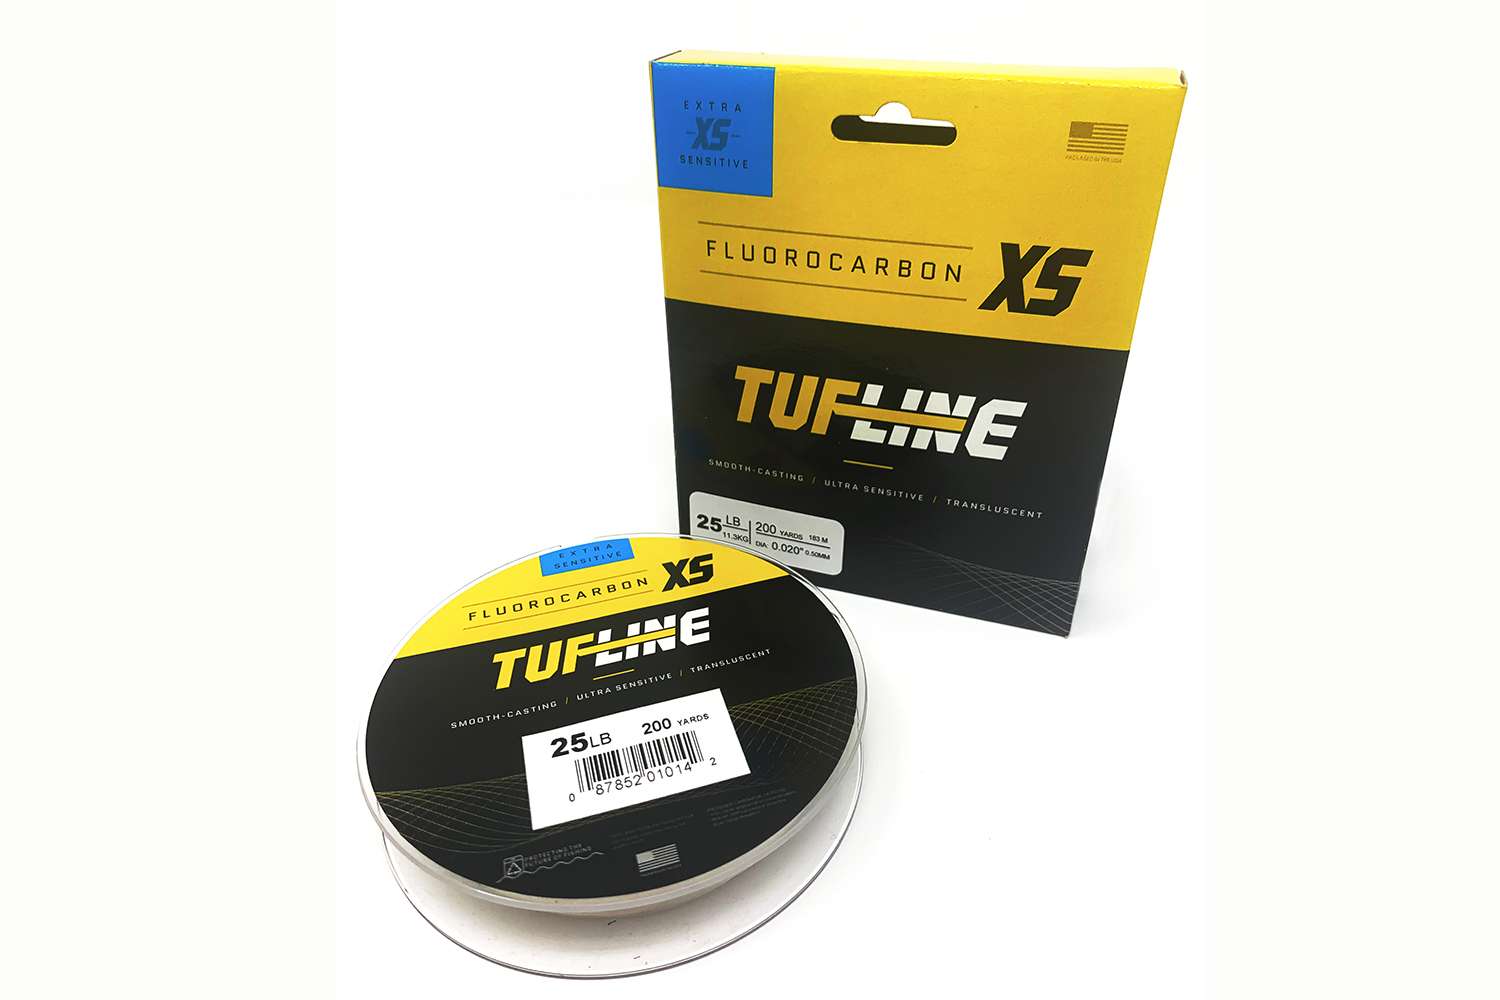 <p><b>Tuf-Line Fluorocarbon XS and XD </b></p>
<p>The new fluorocarbon line that is virtually invisible underwater with exceptional abrasion resistance. The fast-sinking Flurocarbon XD, offered in 30- to 150-pound tests, is the perfect line for targeting skittish fish or targeting species in heavy cover or rocky bottoms. The X-tra Smooth and X-tra Sensitive Fluorocarbon XS, offered in 4- to 25-pound test, is the go-to line for high-sensitivity and fishing gin-clear water for wary fish.</p>
<p><a href=